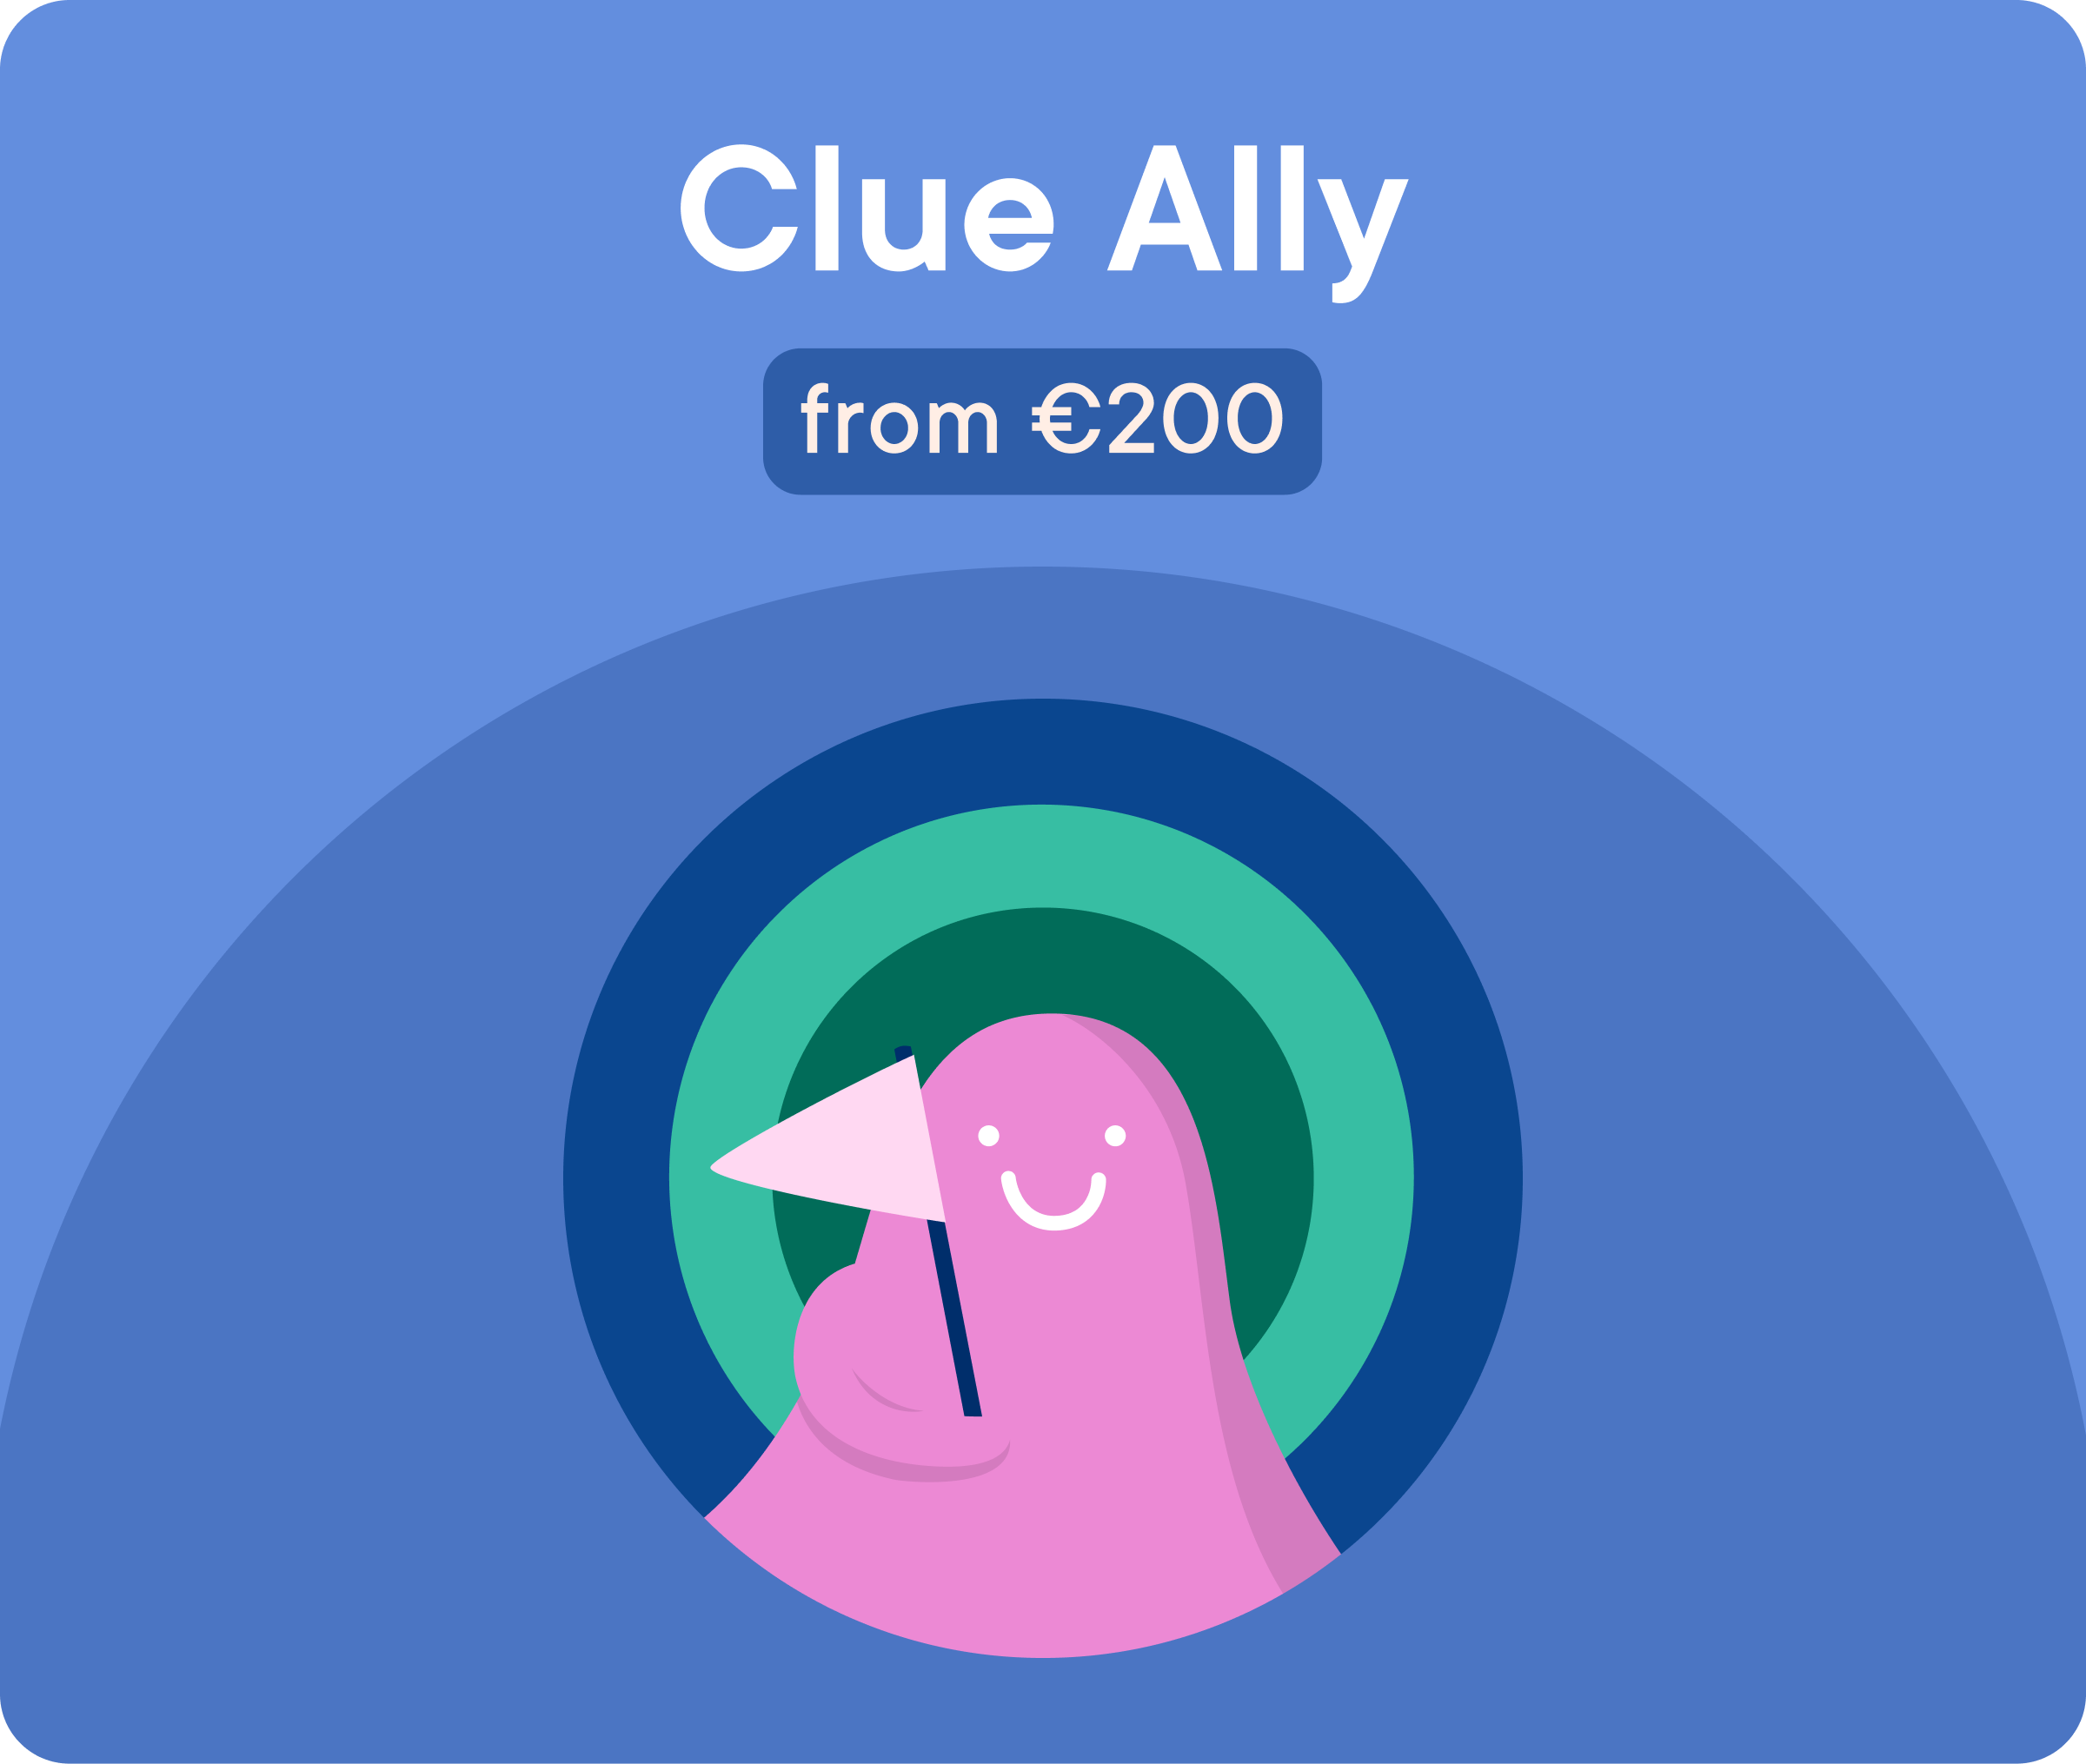 Clue Ally from €200